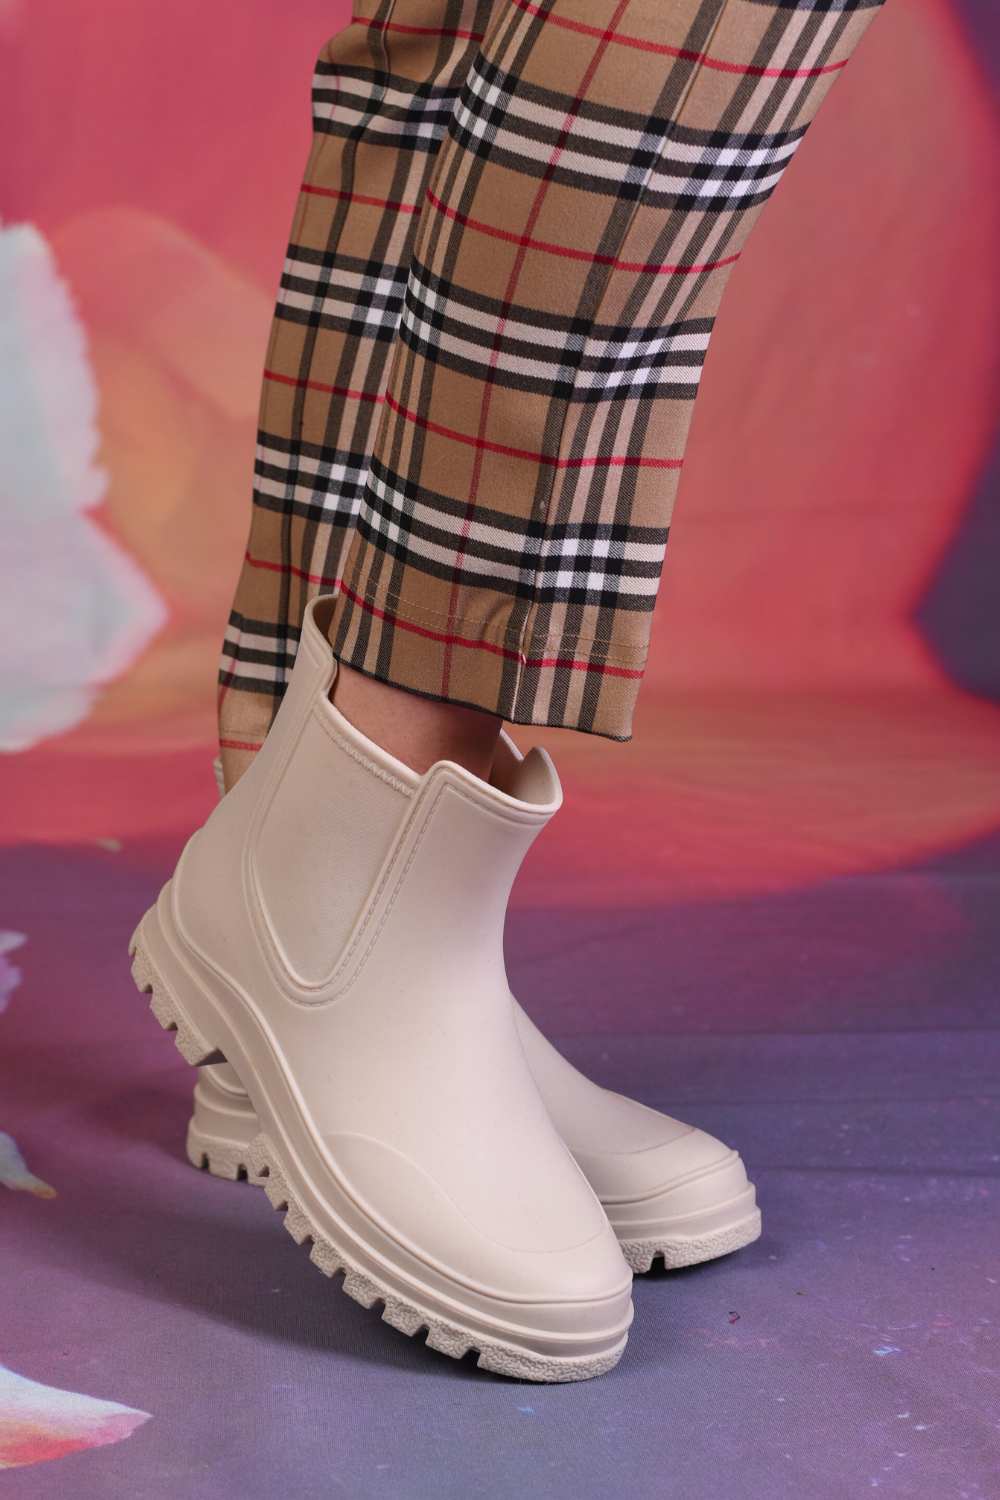 Model wearing the Annah Stretton Mickey Gumboot in cream